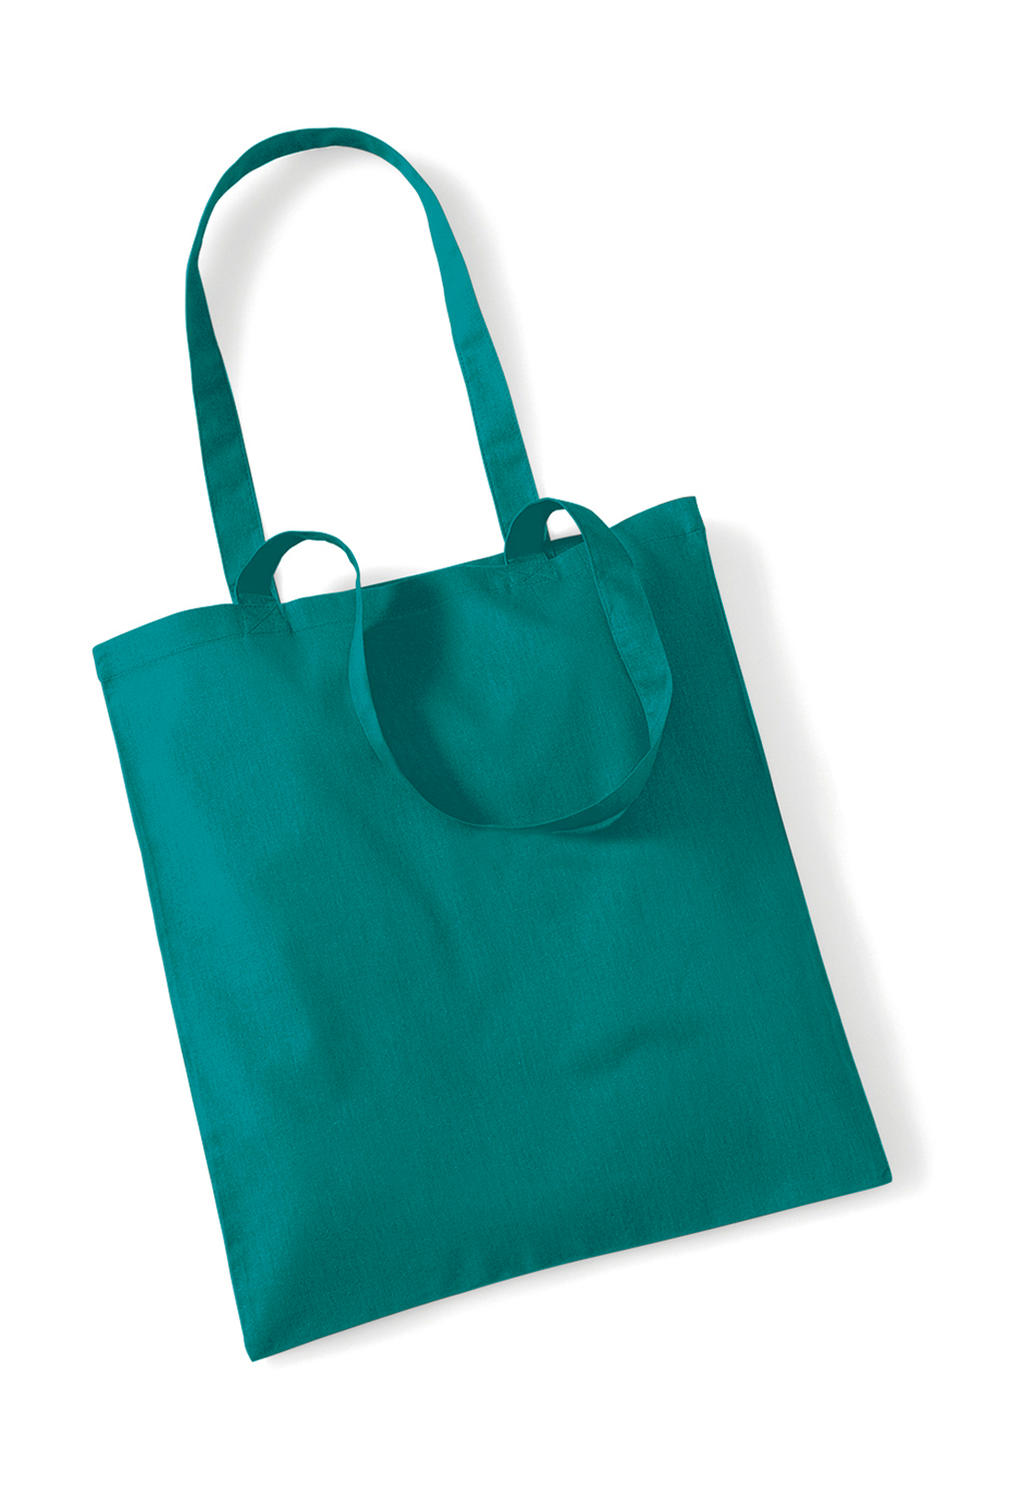  Bag for Life - Long Handles in Farbe Emerald